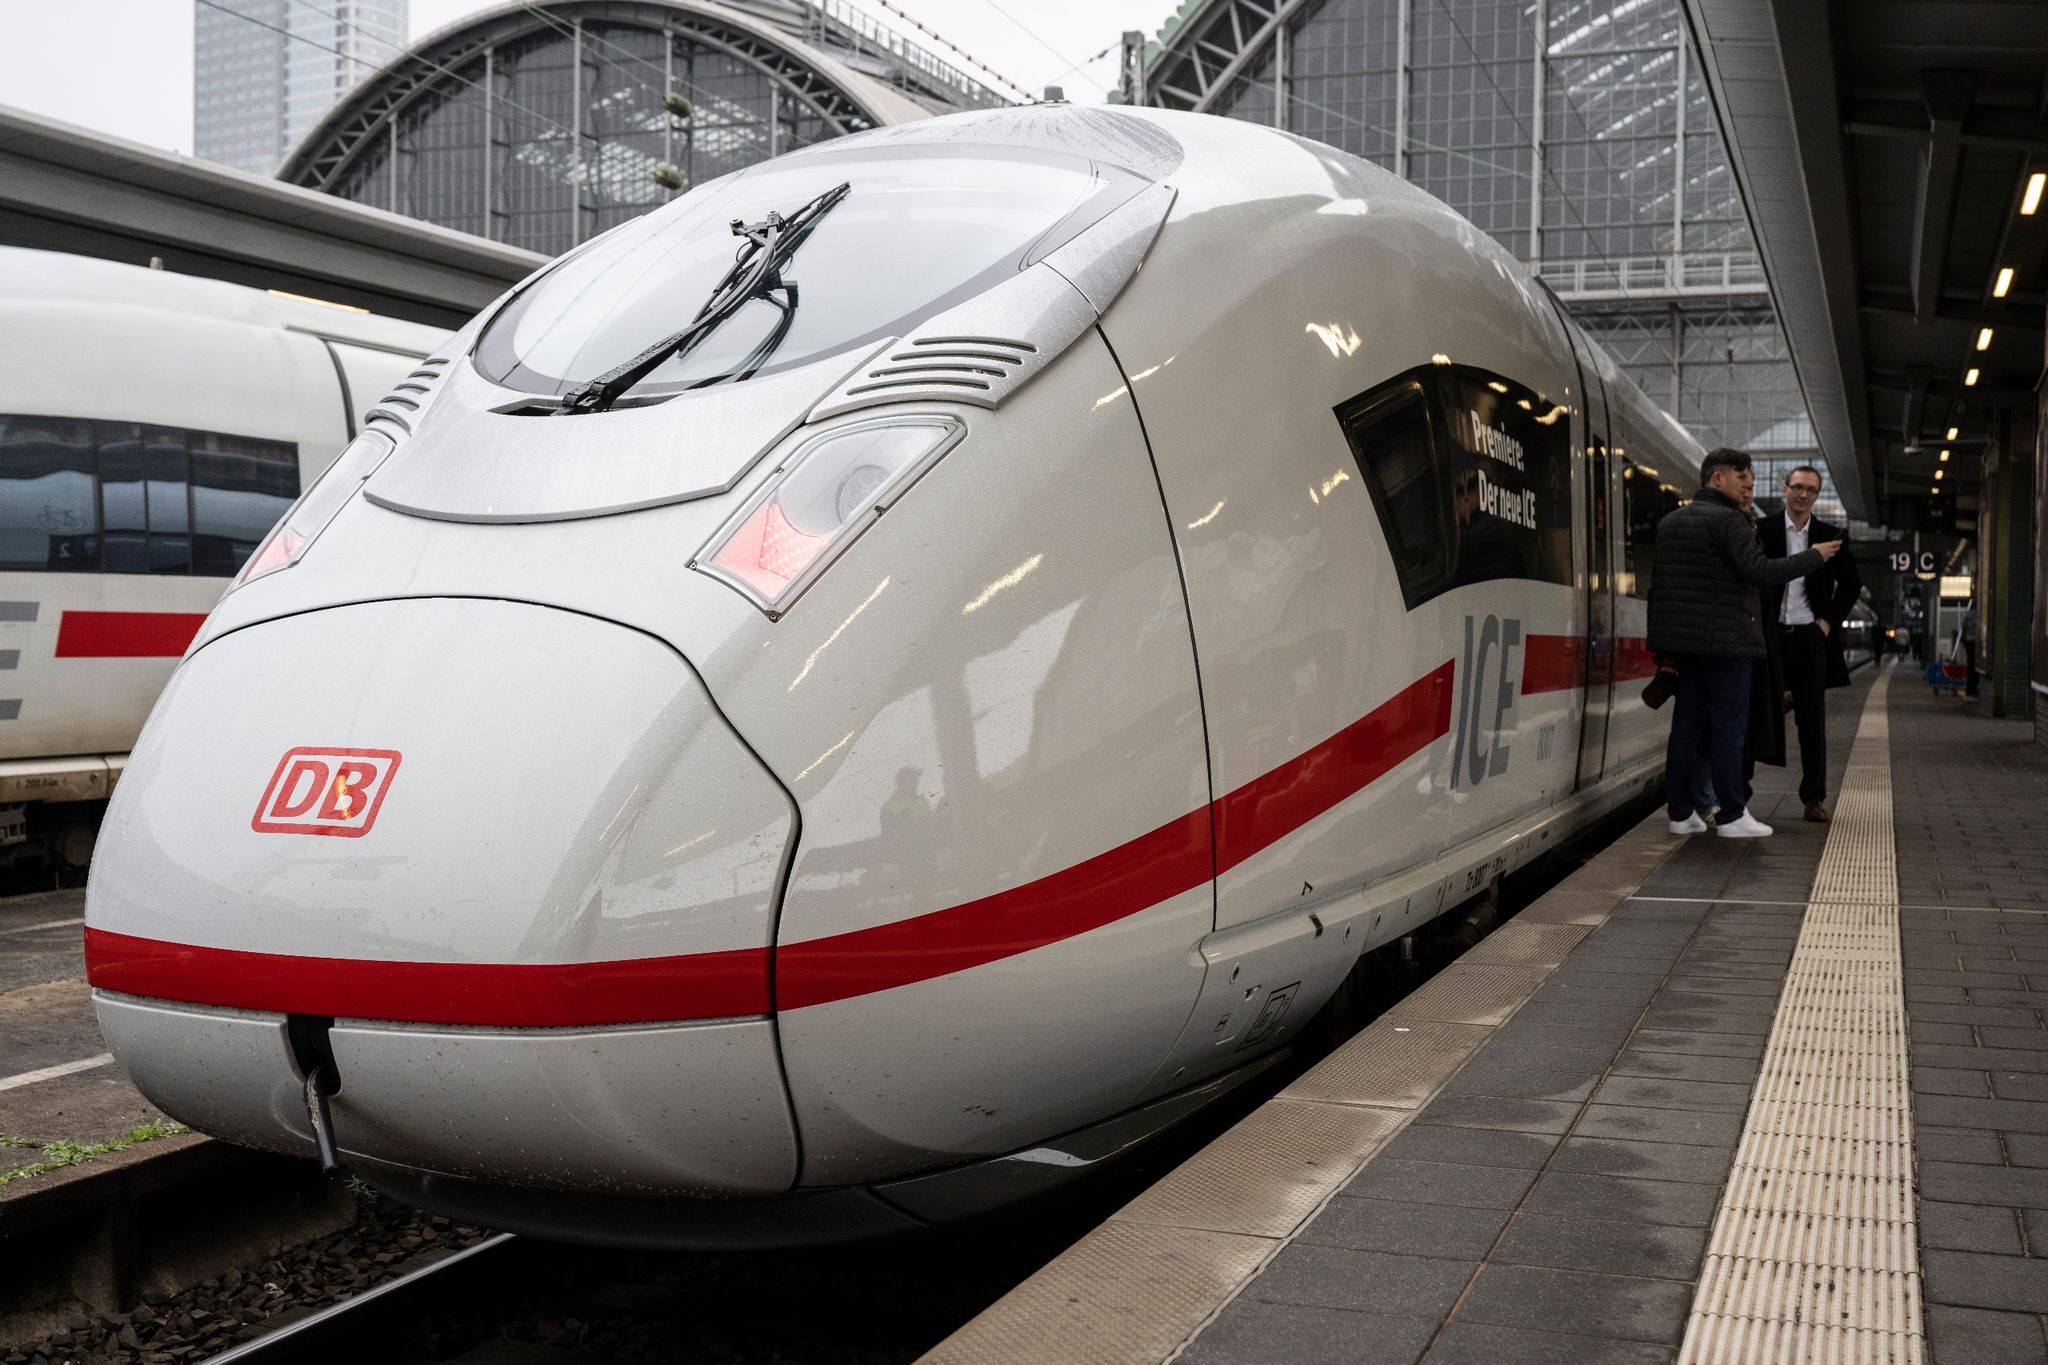 The first Velaro MS (ICE 3neo) high-speed train at the central station of Frankfurt, Germany